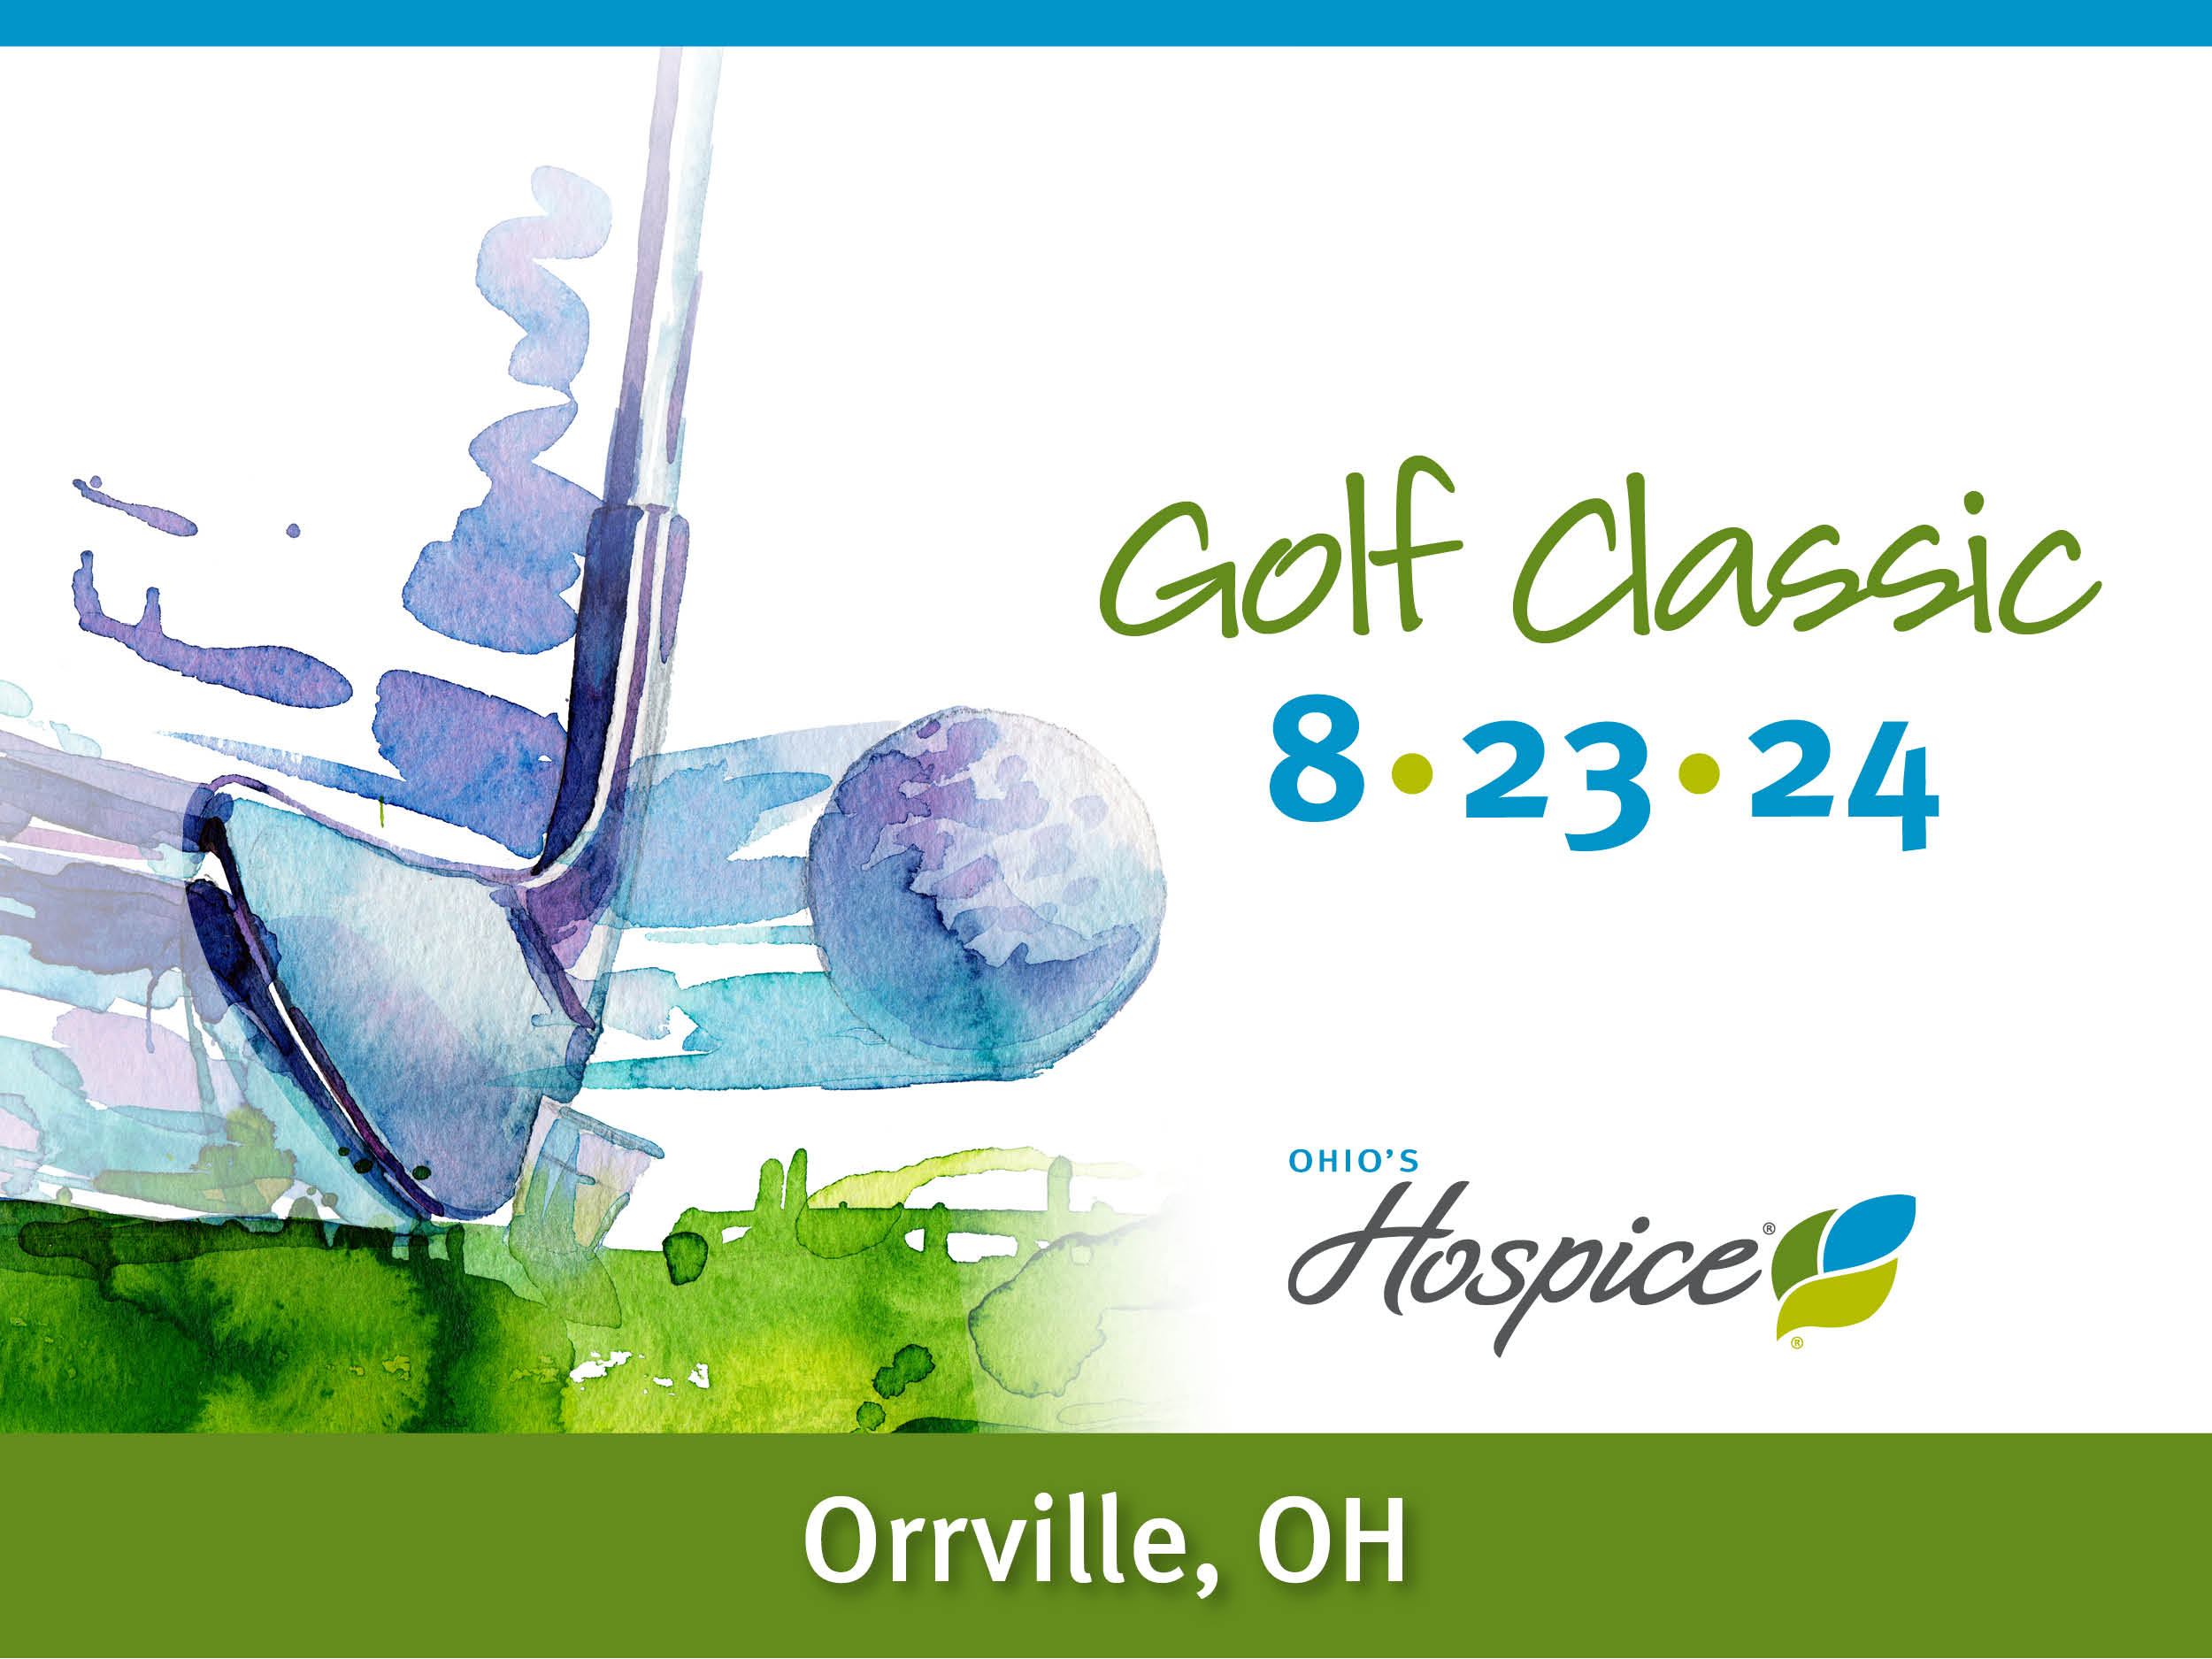 Golf Classic 8.23.24 Orrville, OH